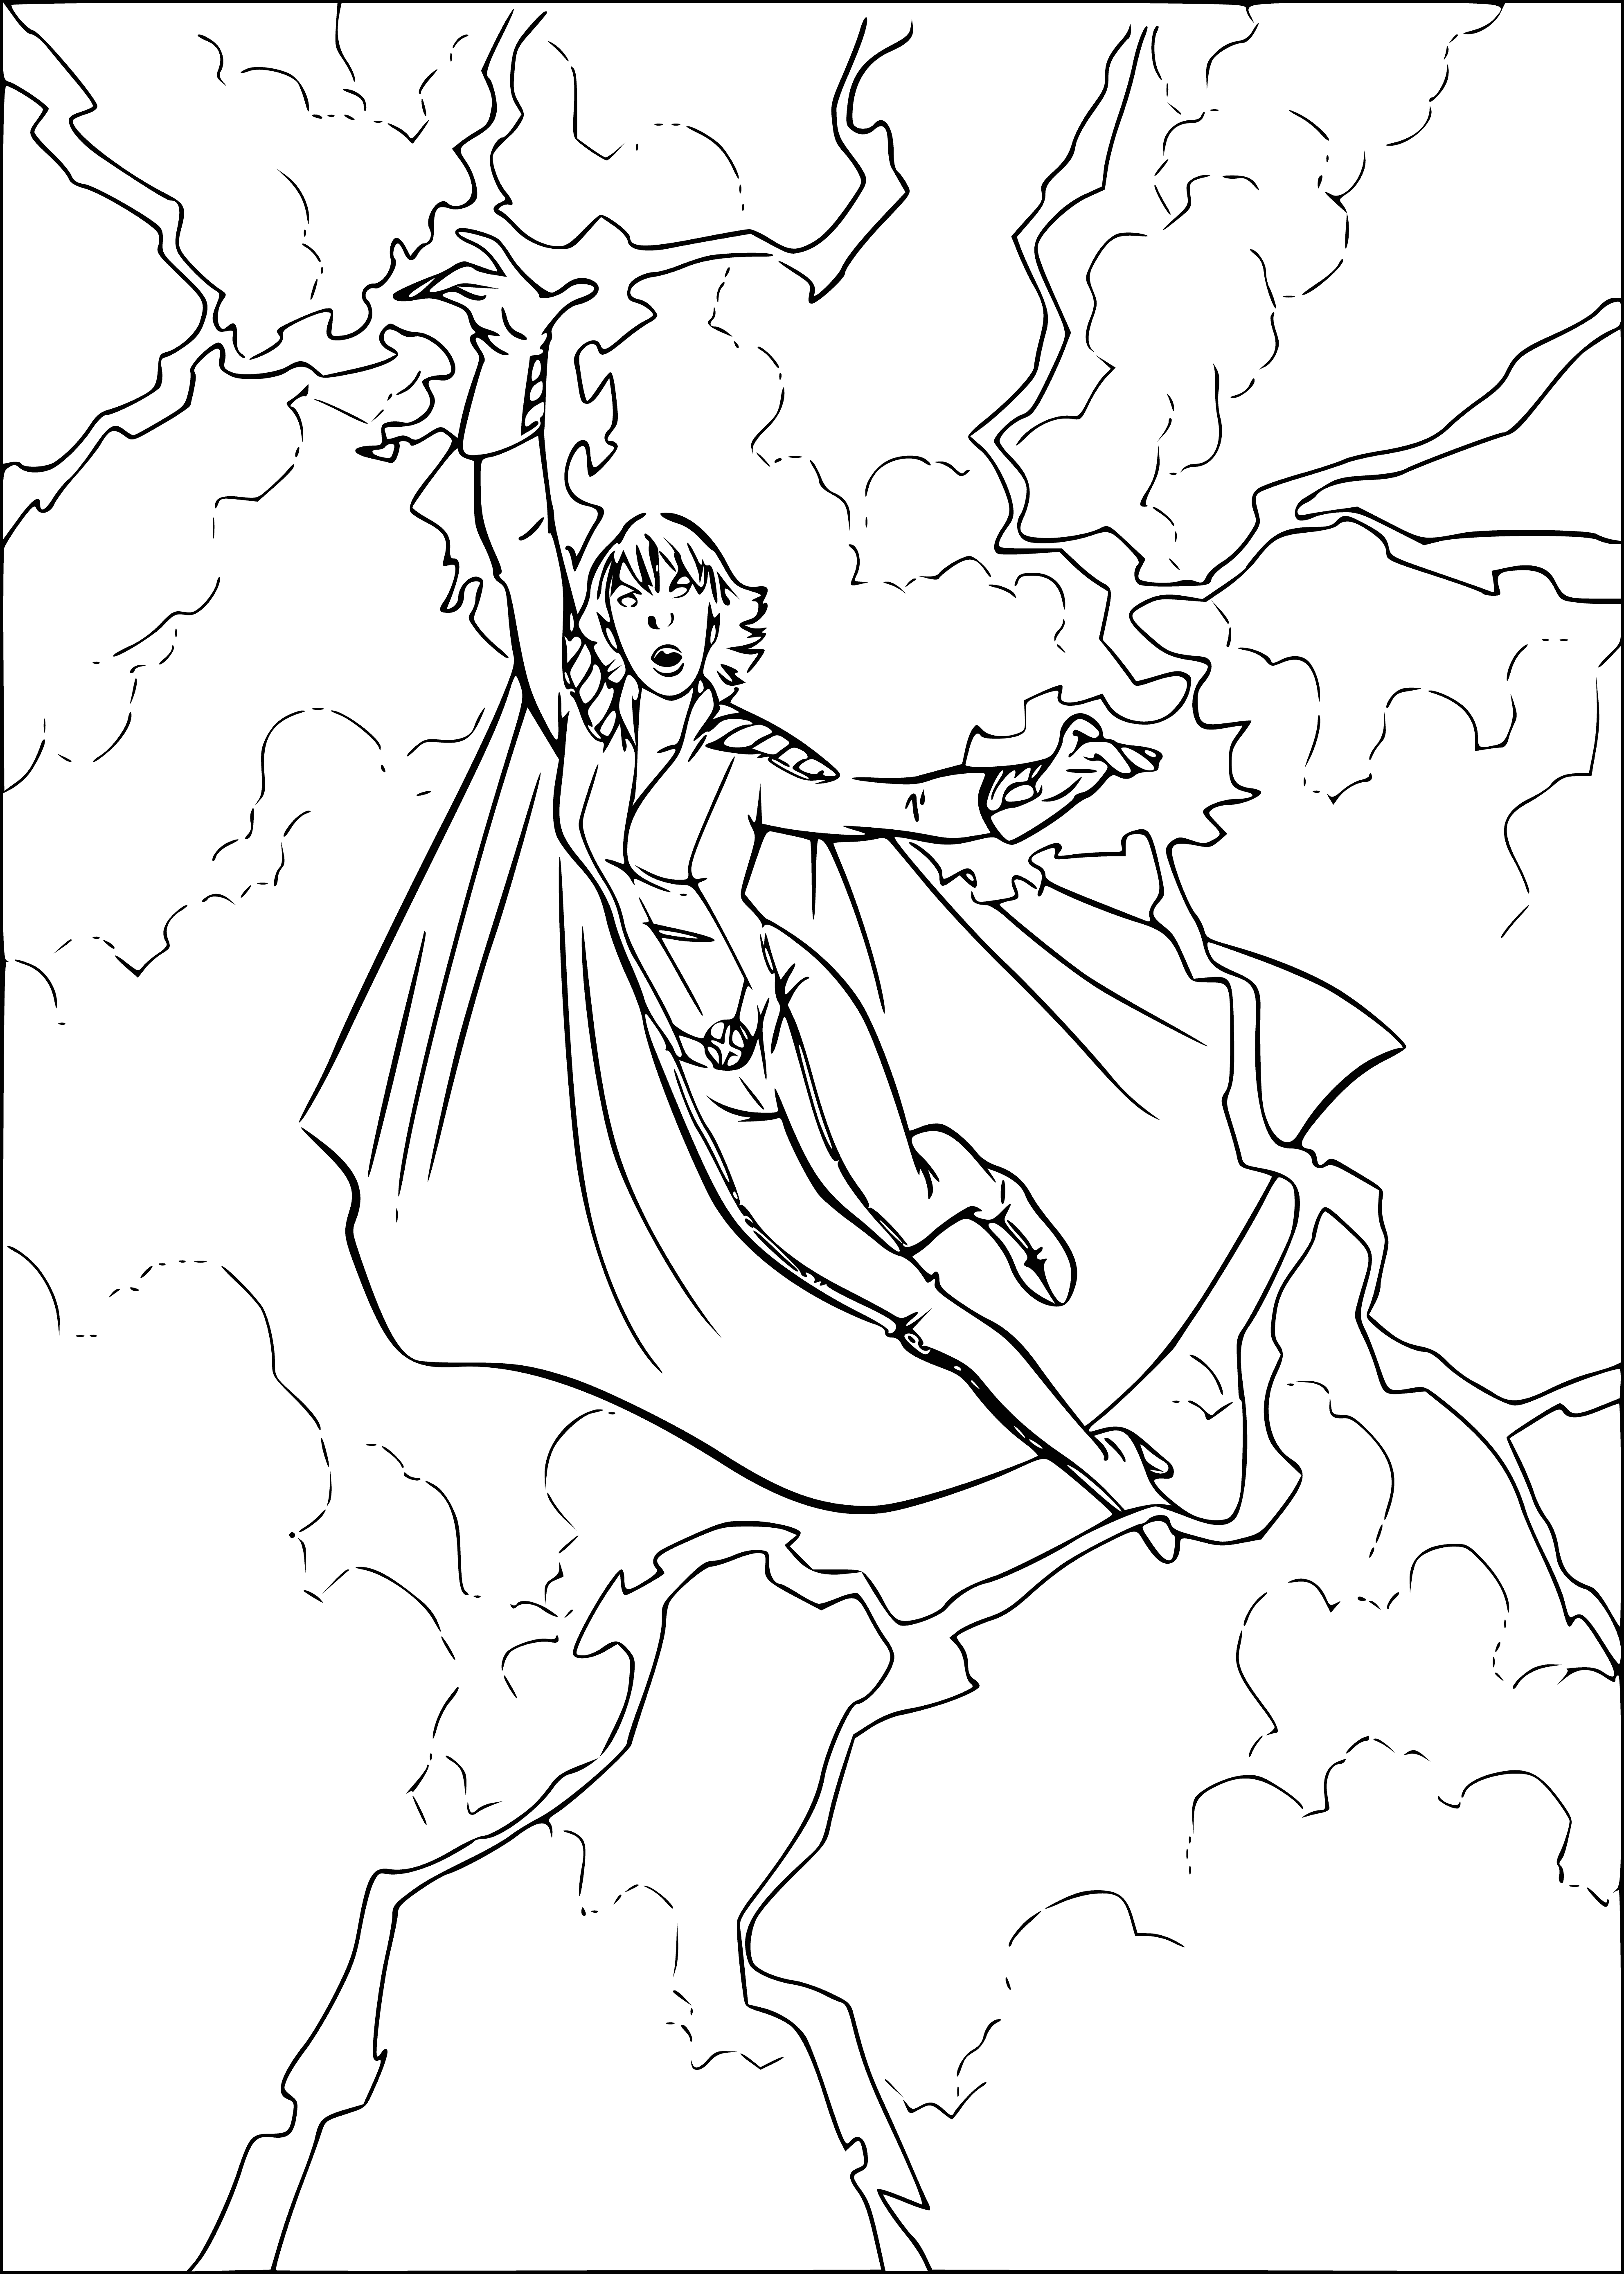 coloring page: Woman in coloring page wears black cape, wild white hair, electric blue eyes. Looks strong and confident, ready for anything.